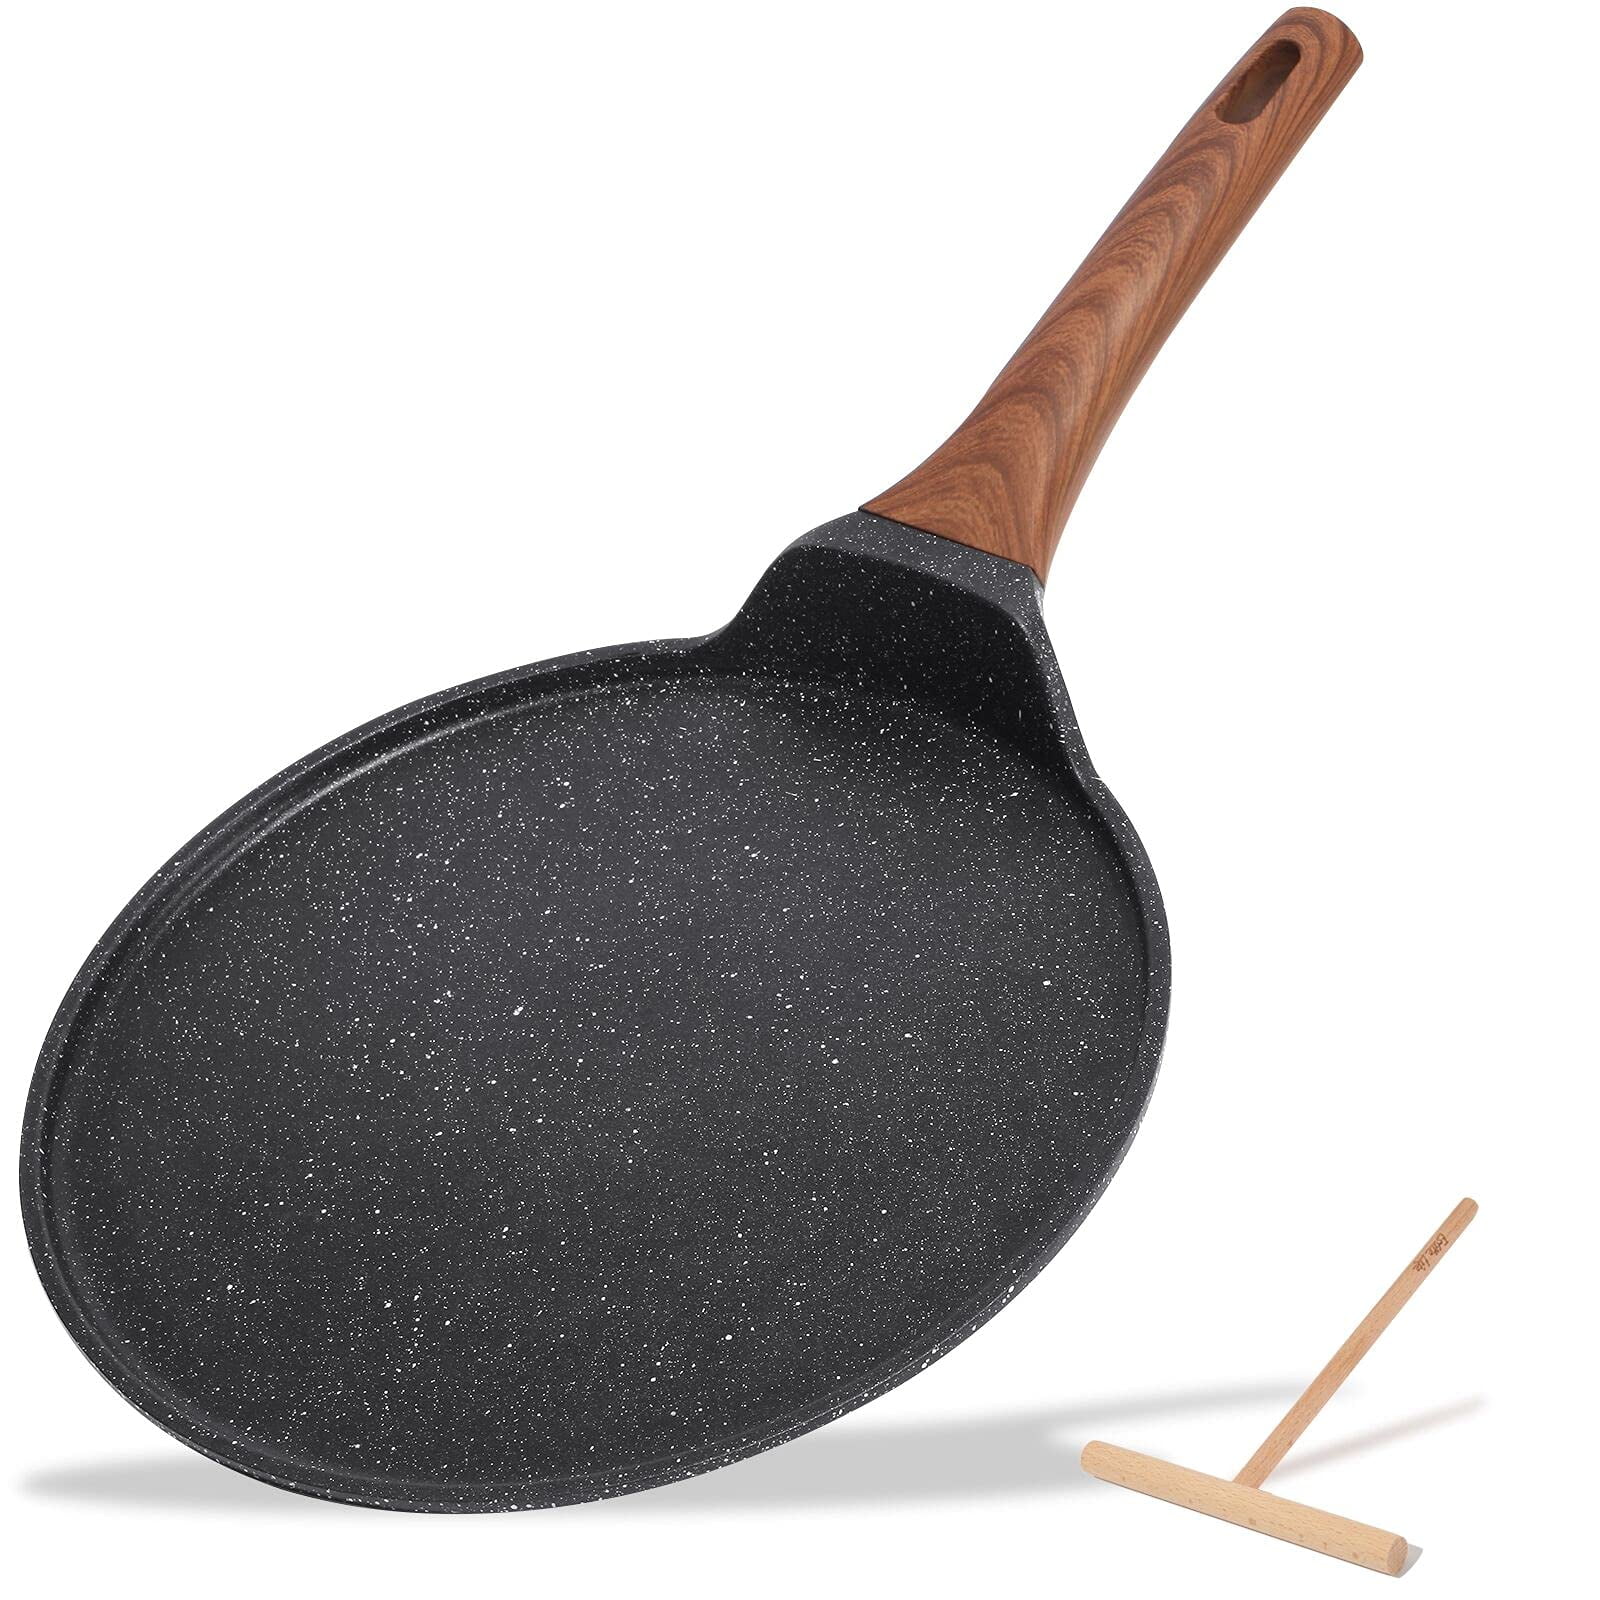 9.5 Inch Nonstick Crepe Pan with Spreader Induction Compatible, PFOA &  PTFEs Free 